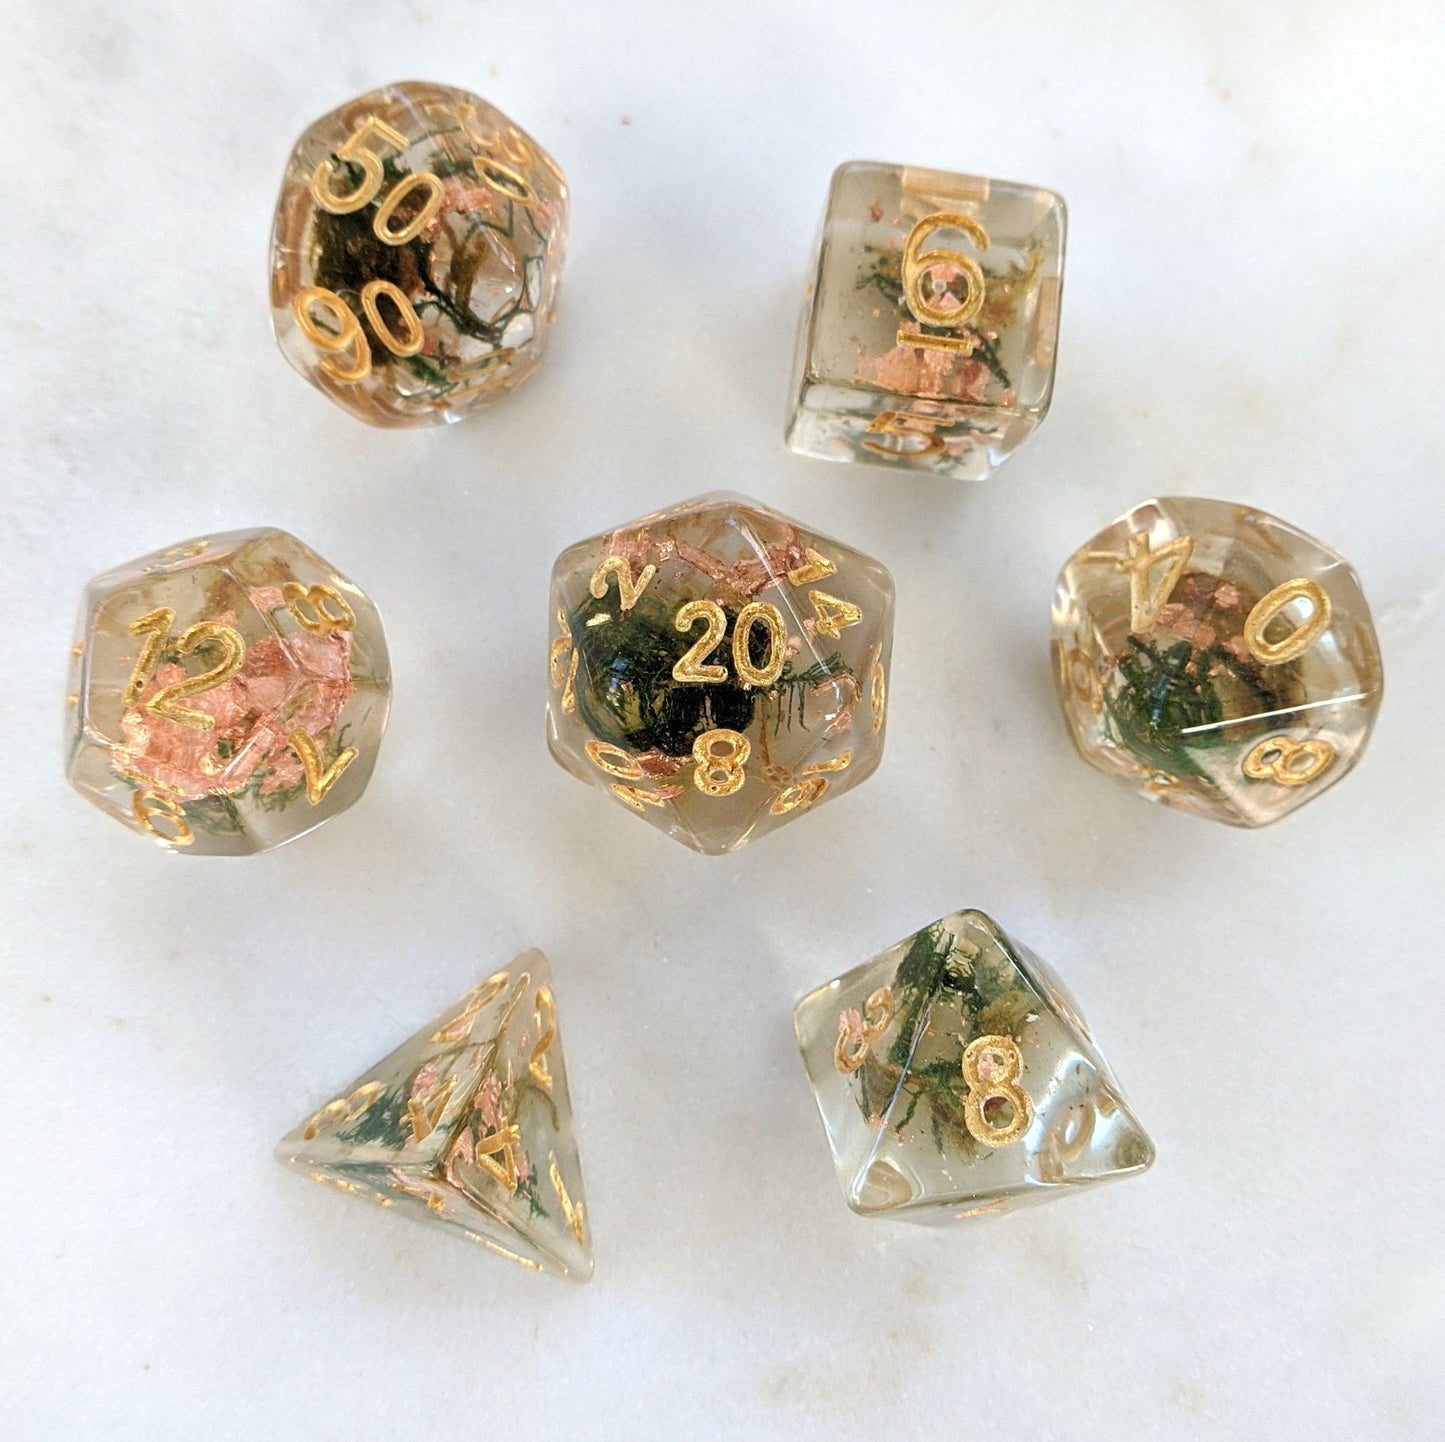 Moss and Copper Dice Set, Translucent Resin Dice with Real Moss and Copper Foil - CozyGamer